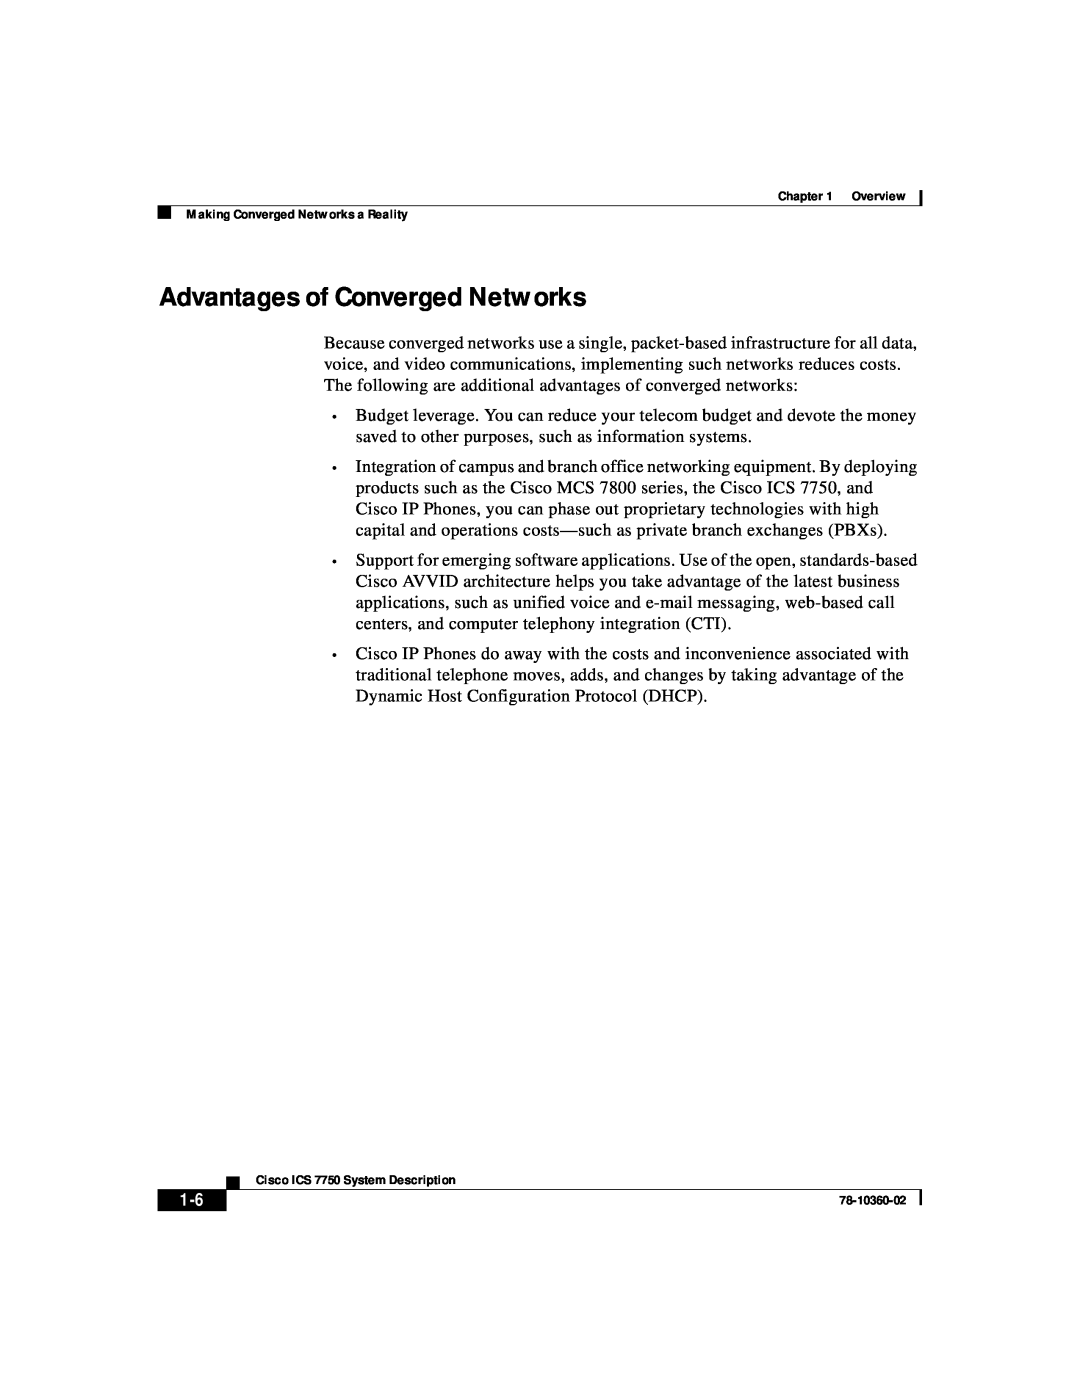 Cisco Systems ICS-7750 manual Advantages of Converged Networks 